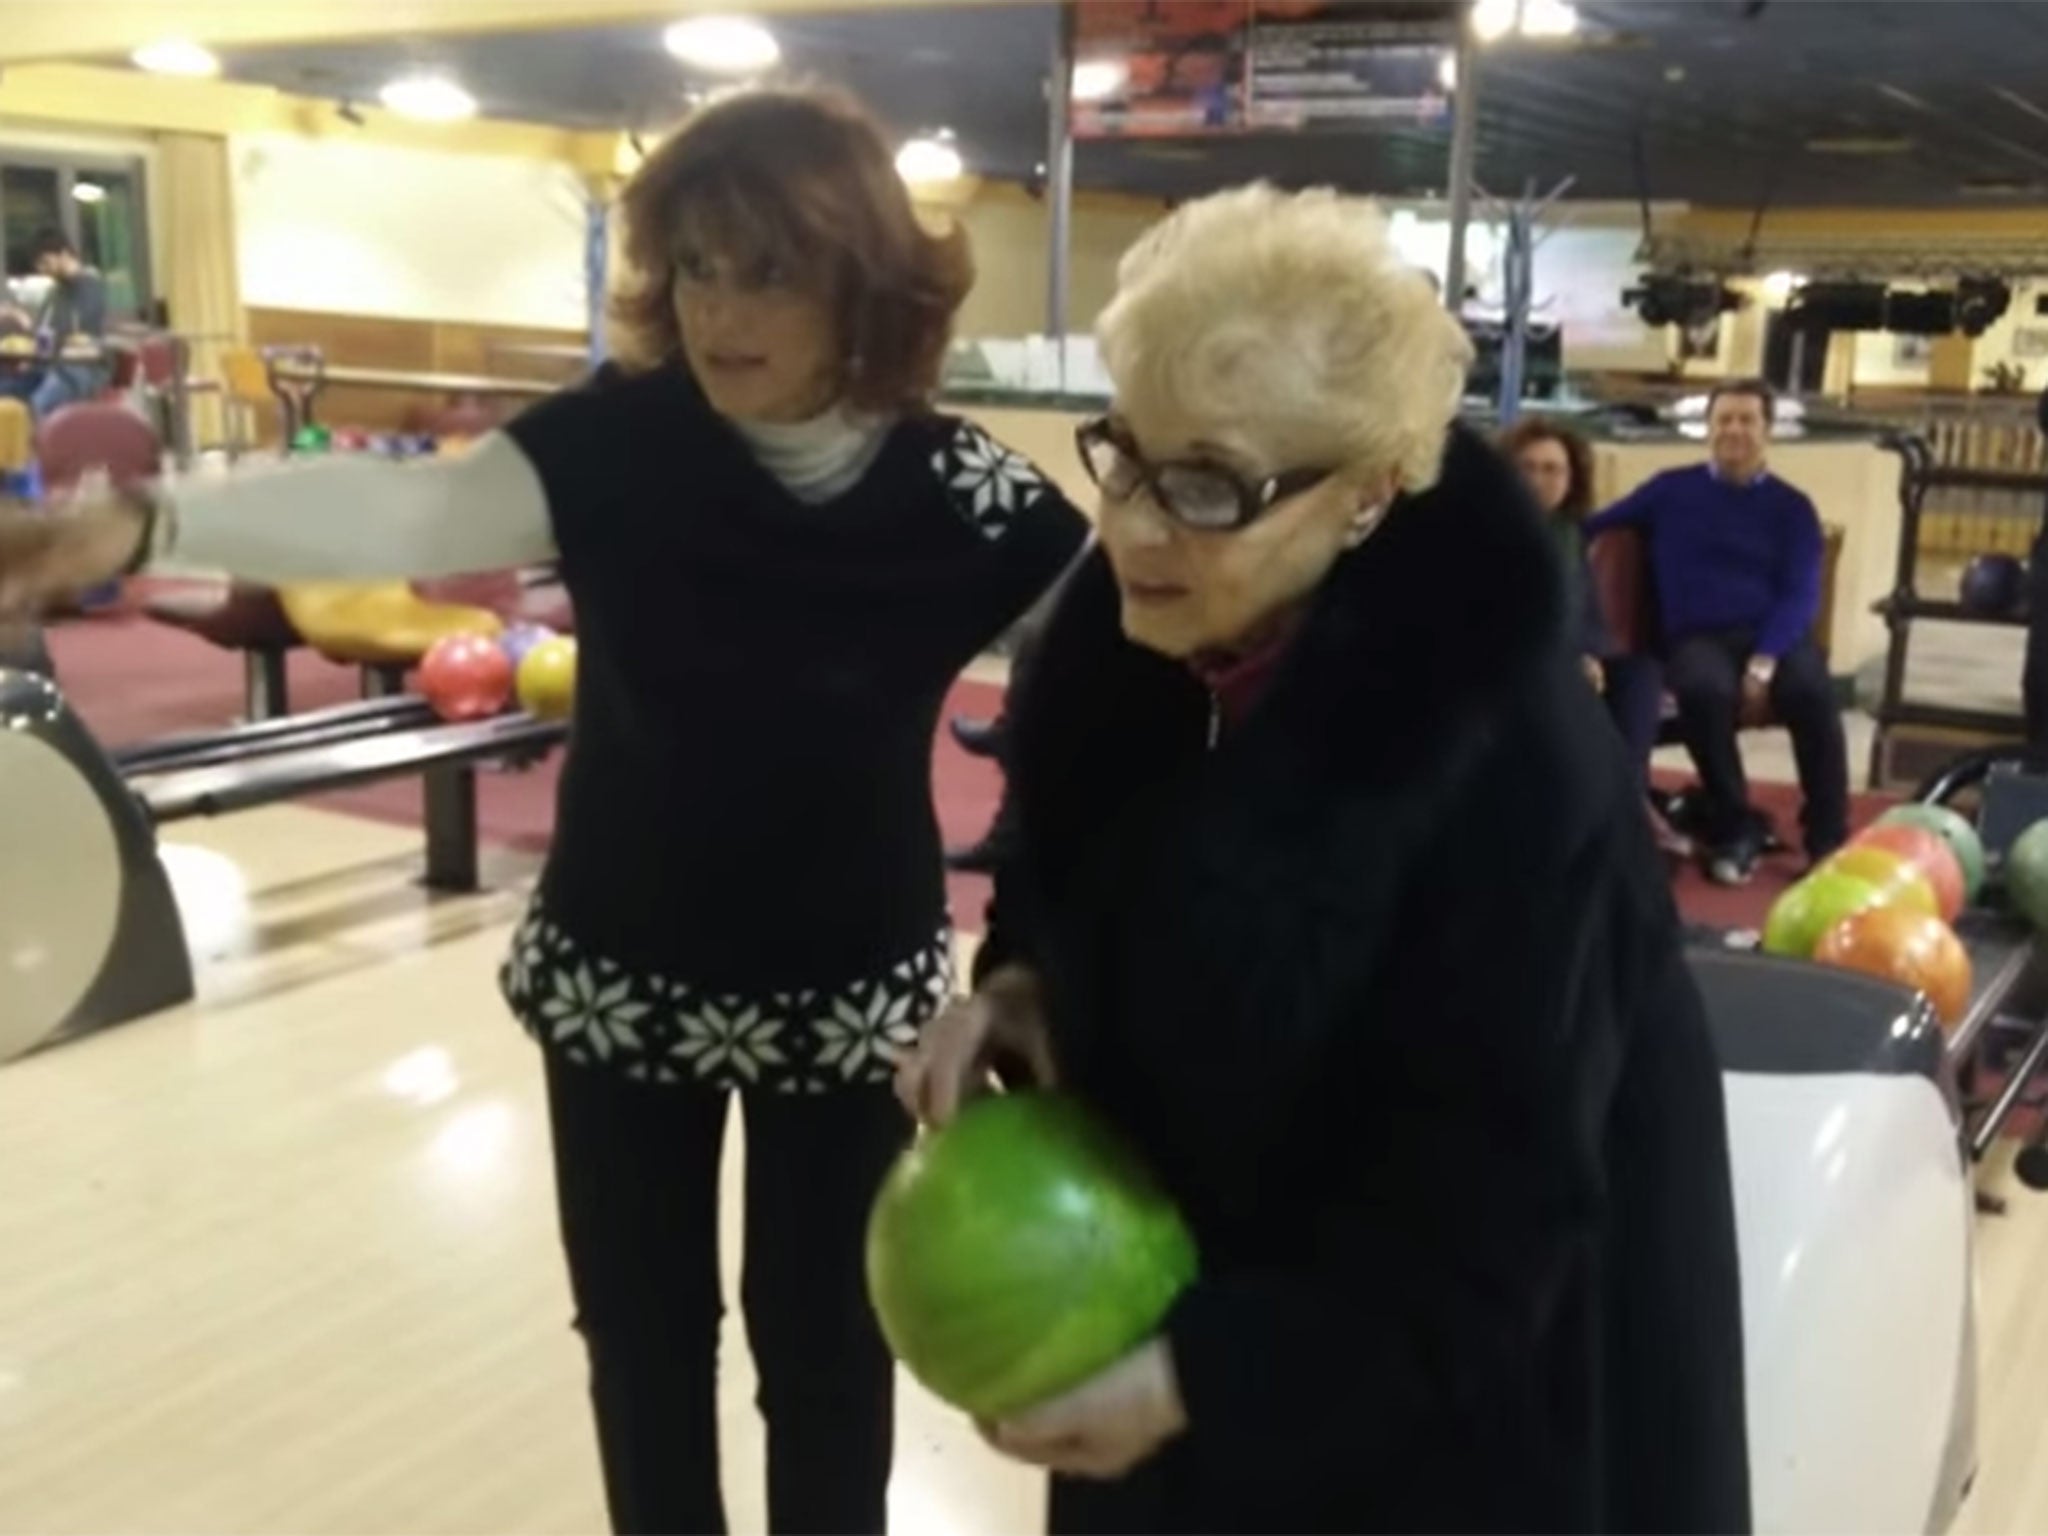 The Italian grandma struggling to get to grips with the ball